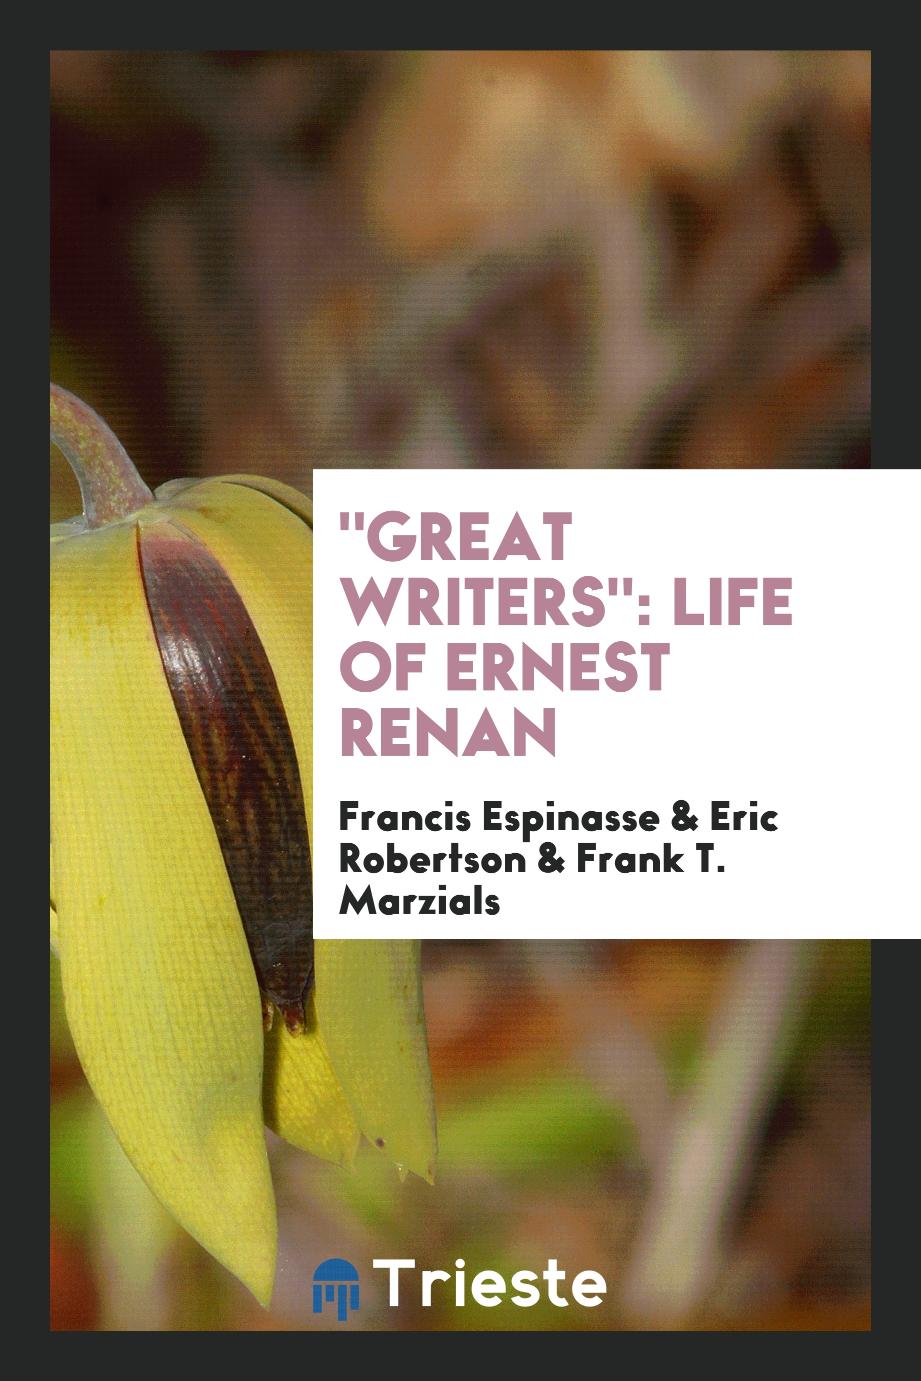 "Great Writers": Life of Ernest Renan